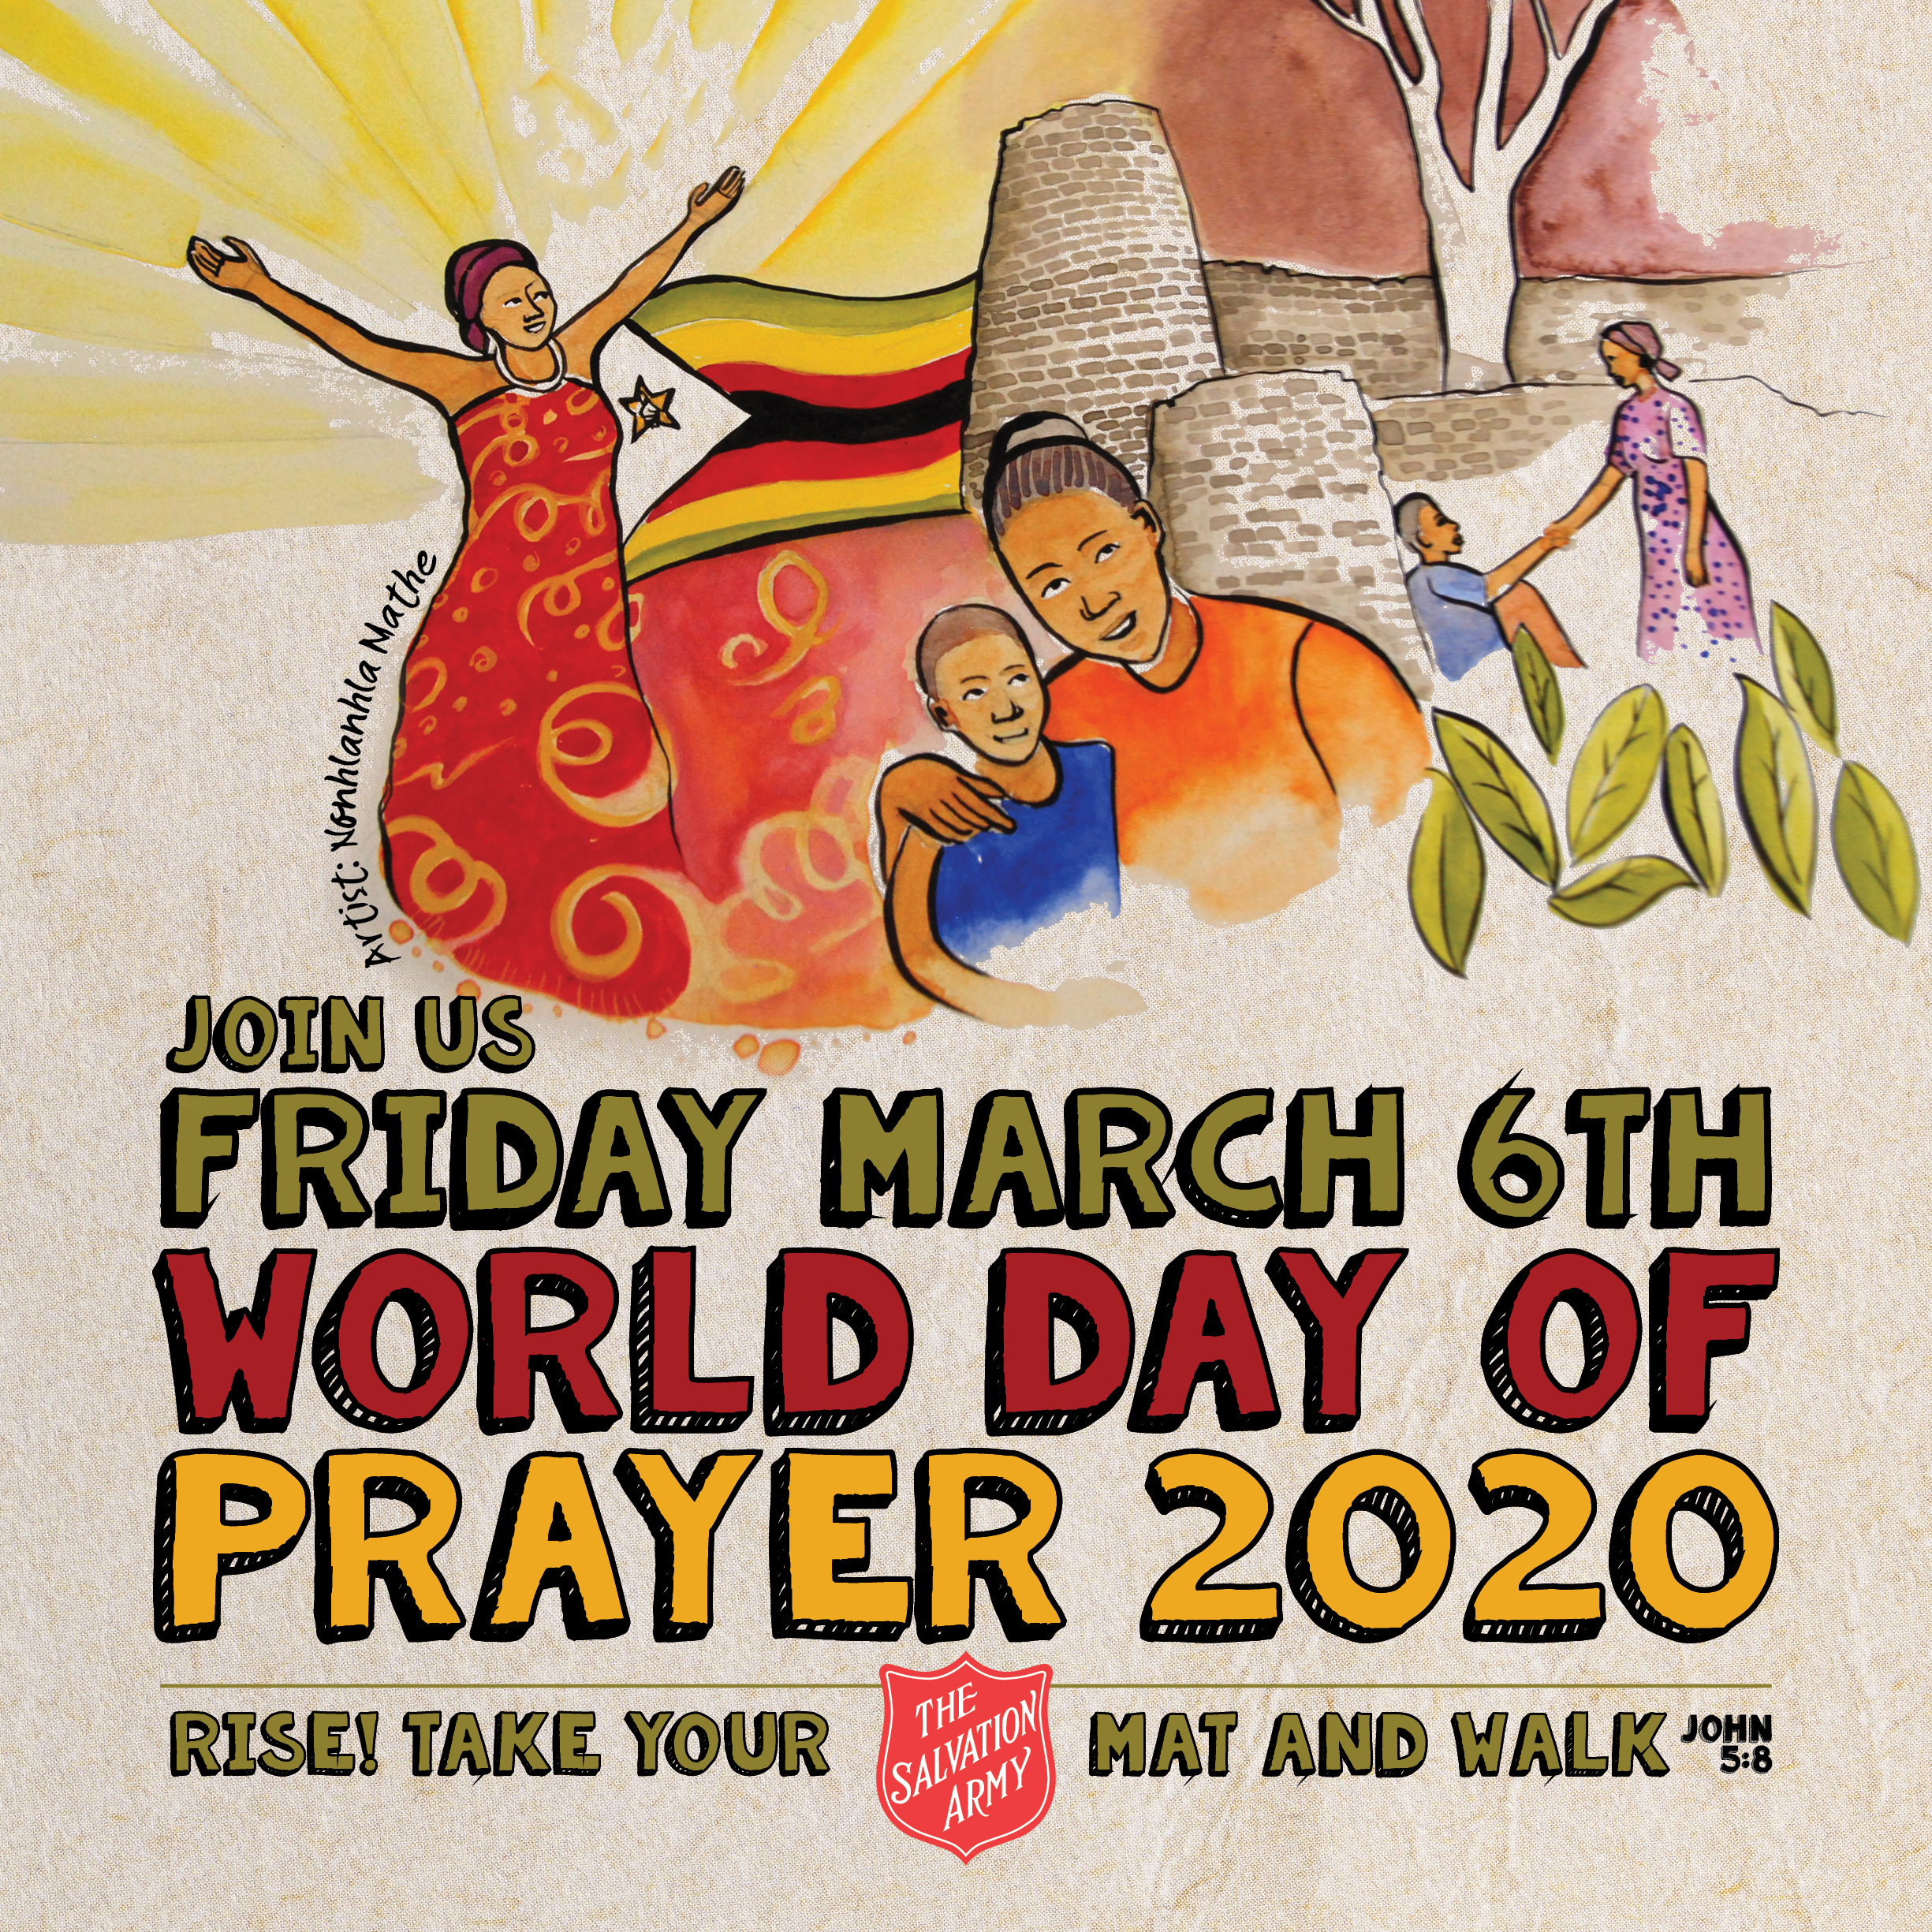 Use our free resources for World Day of Prayer 2020 Rise! Take Your